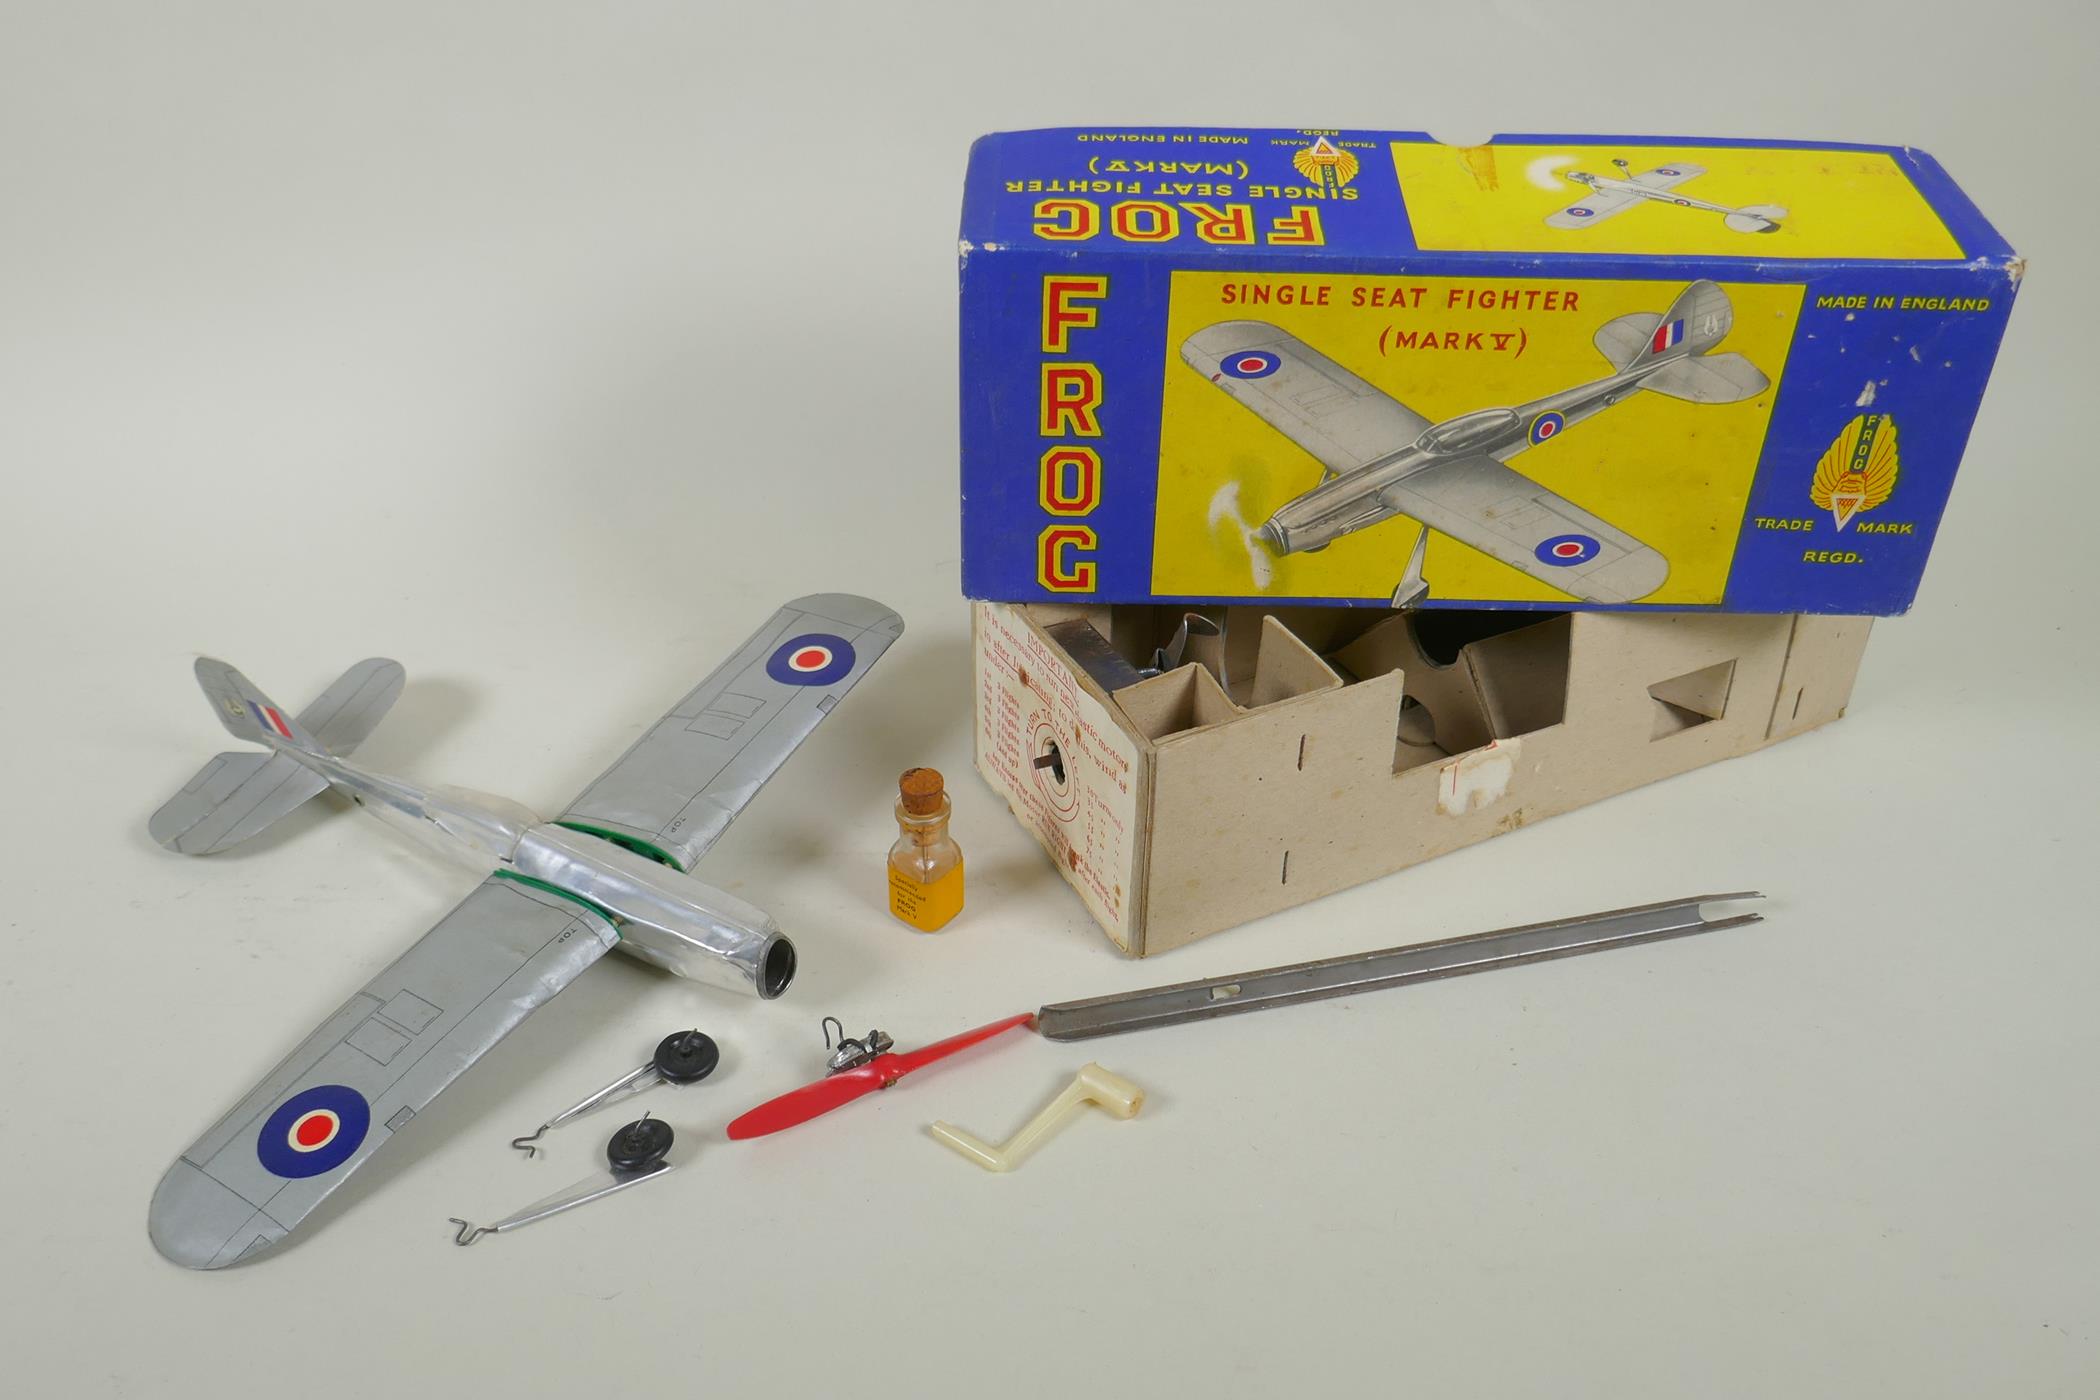 A vintage Frog single seat Fighter Mk V model aircraft, in original box, appears complete